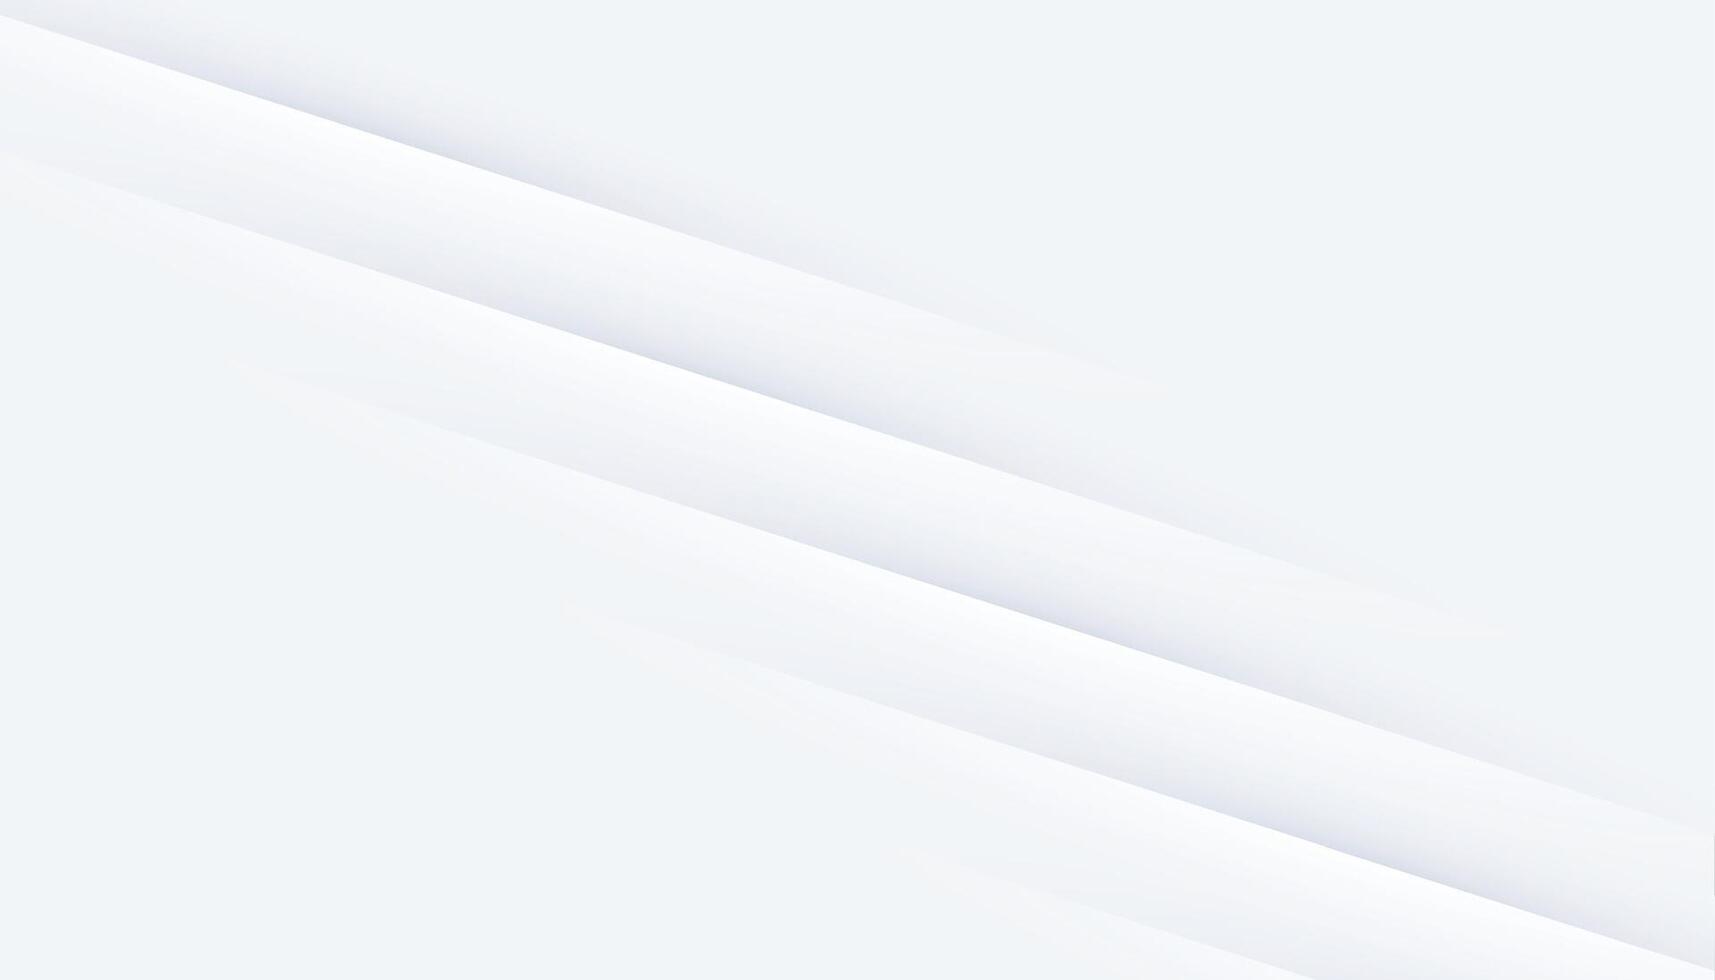 abstract neumorphic white banner with slanting lines vector